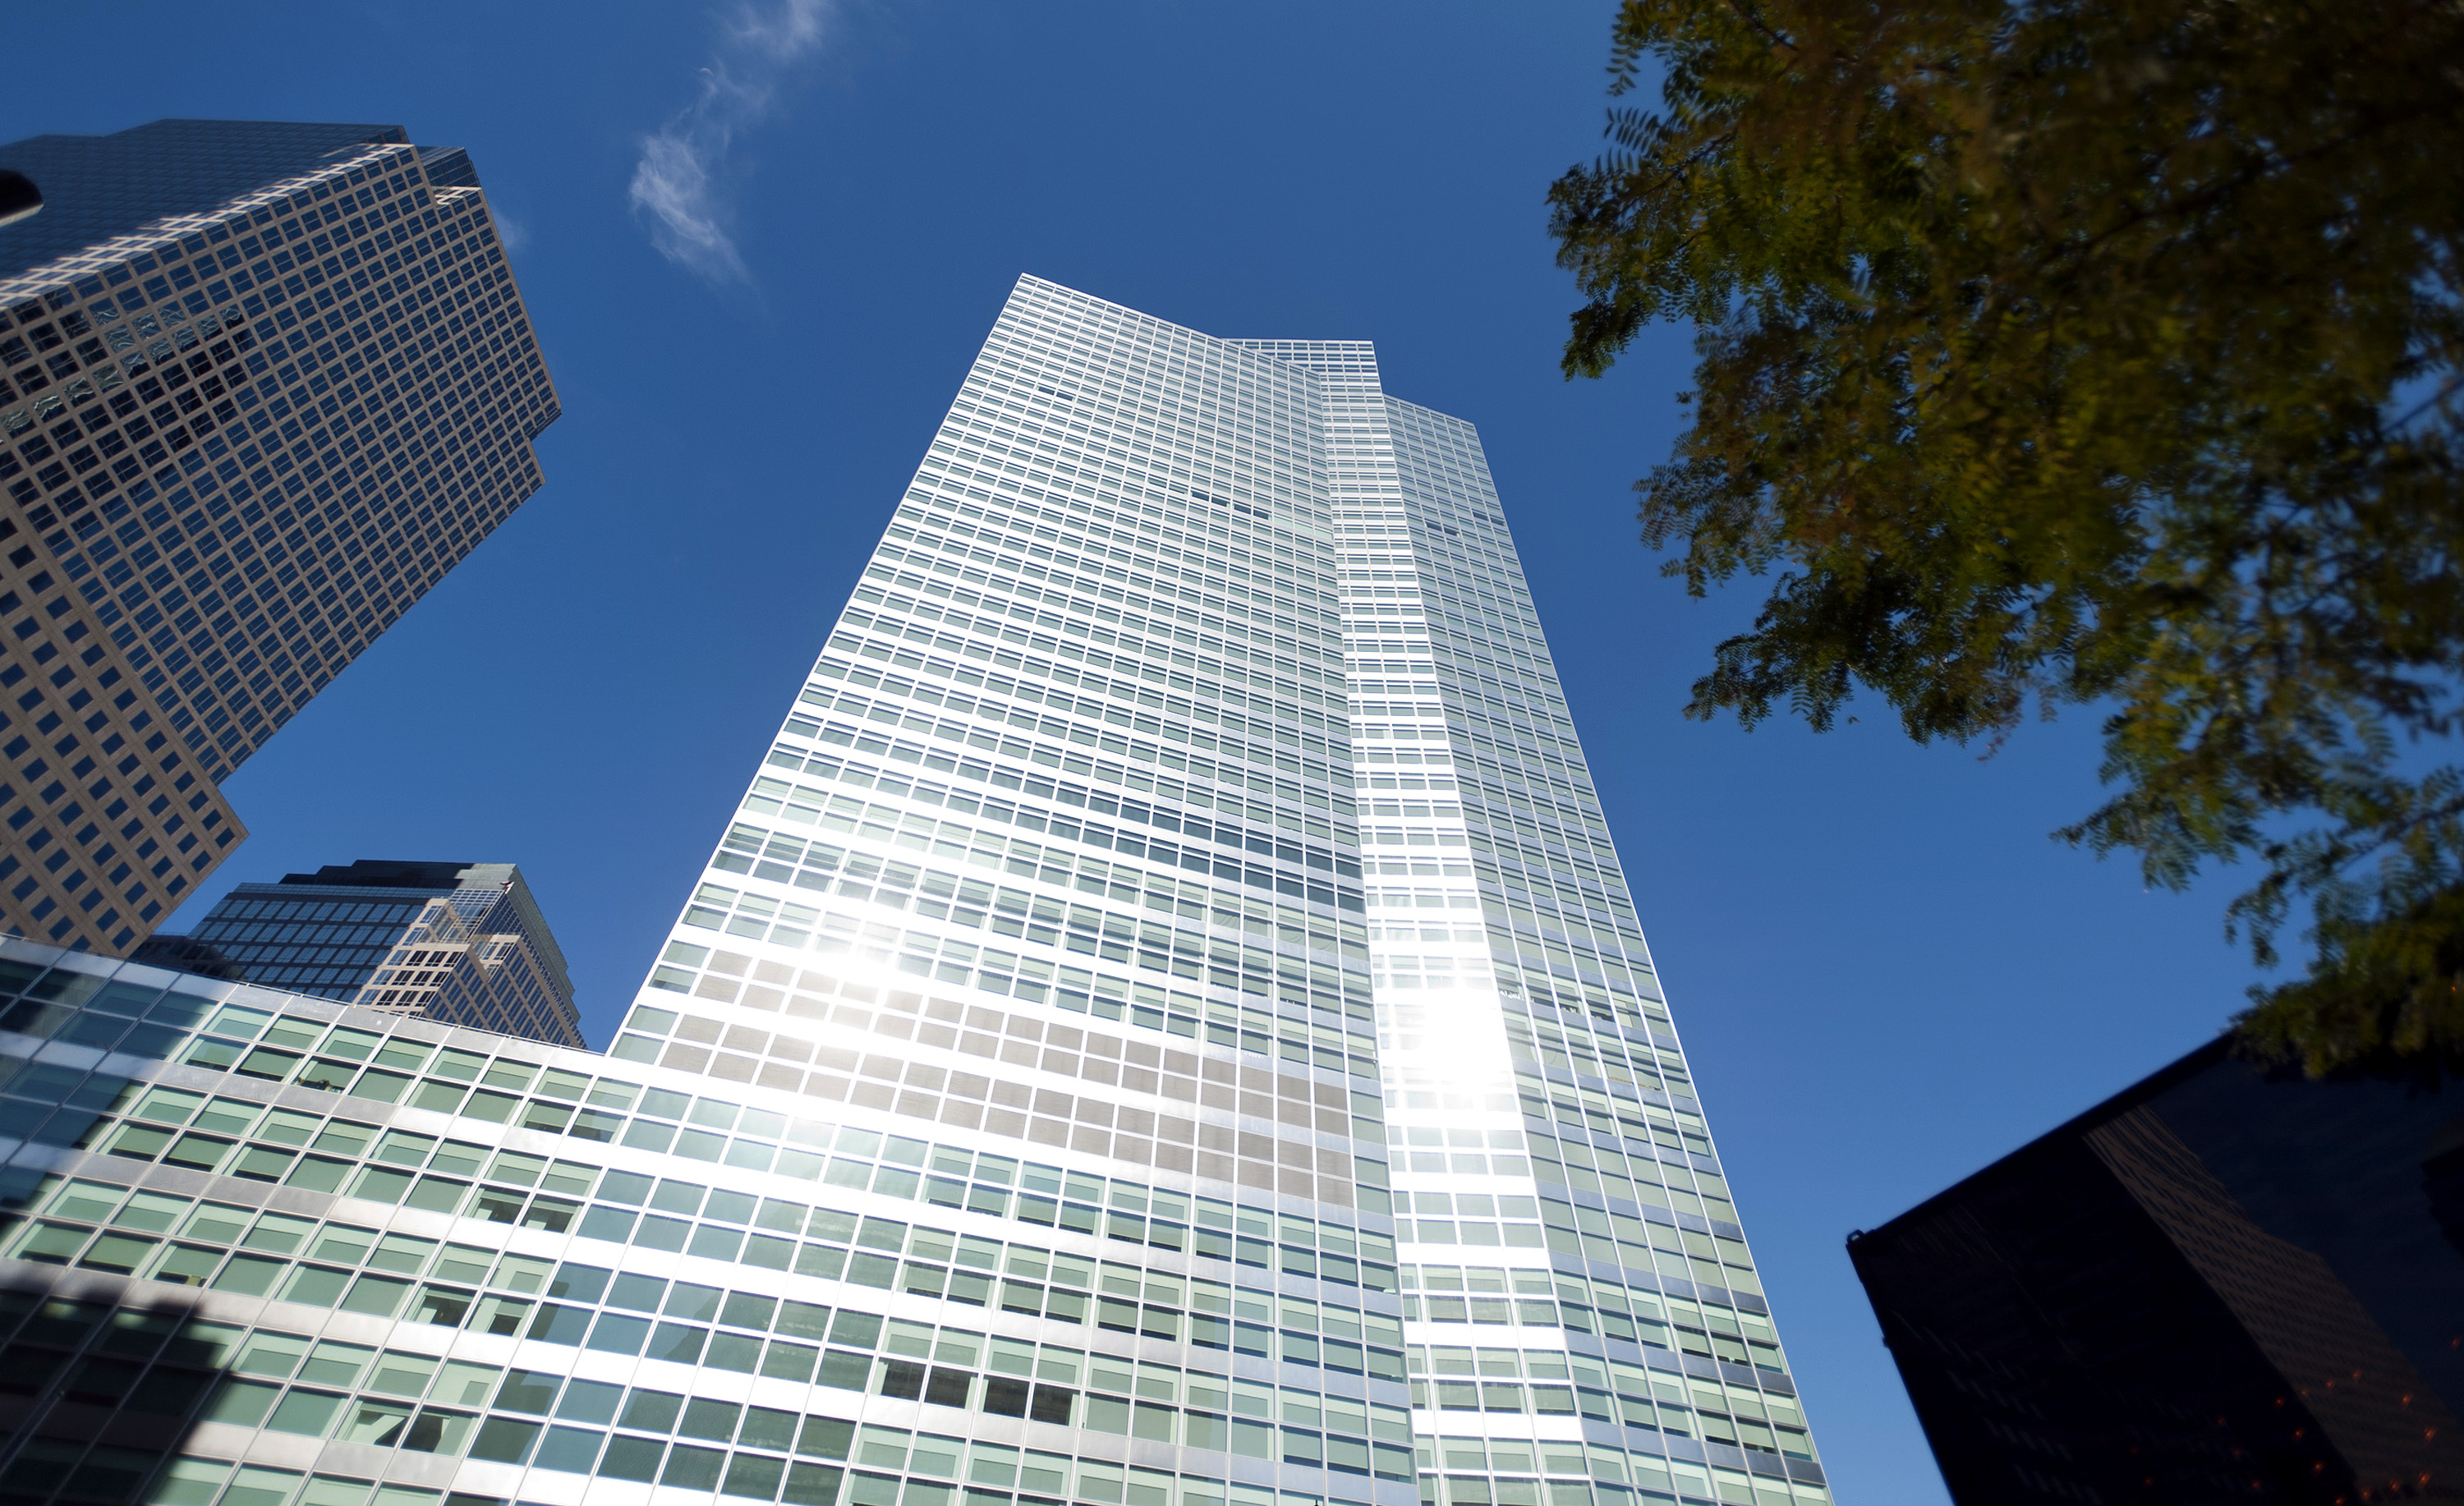 Goldman Sachs's headquarters at 200 West Street in New York
